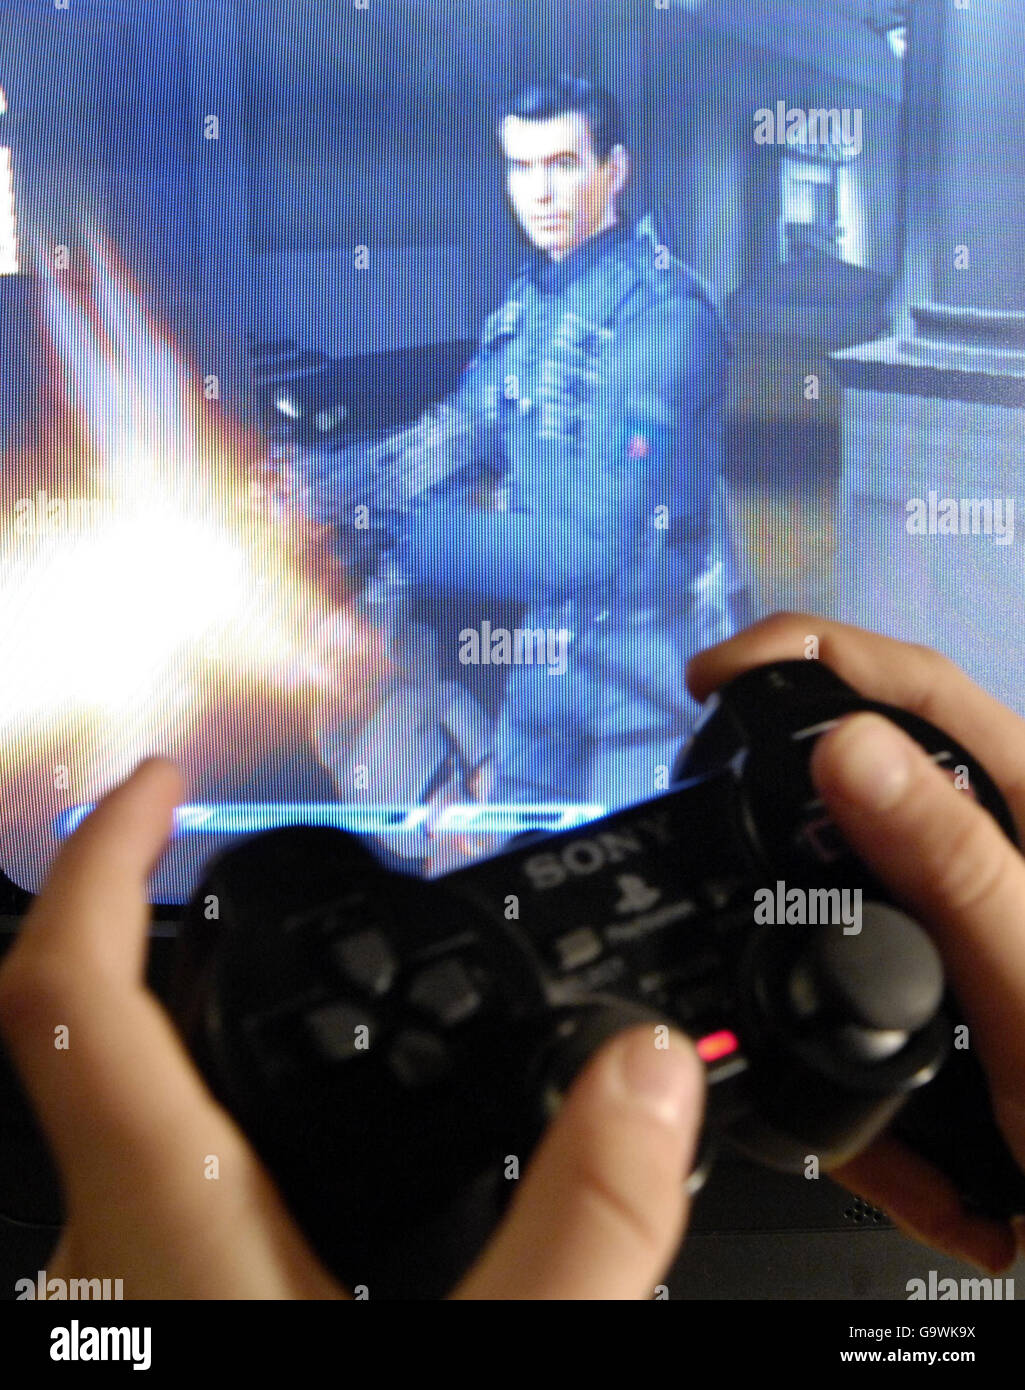 Gadget stock. A boy playing on a Play Station computer game. Stock Photo